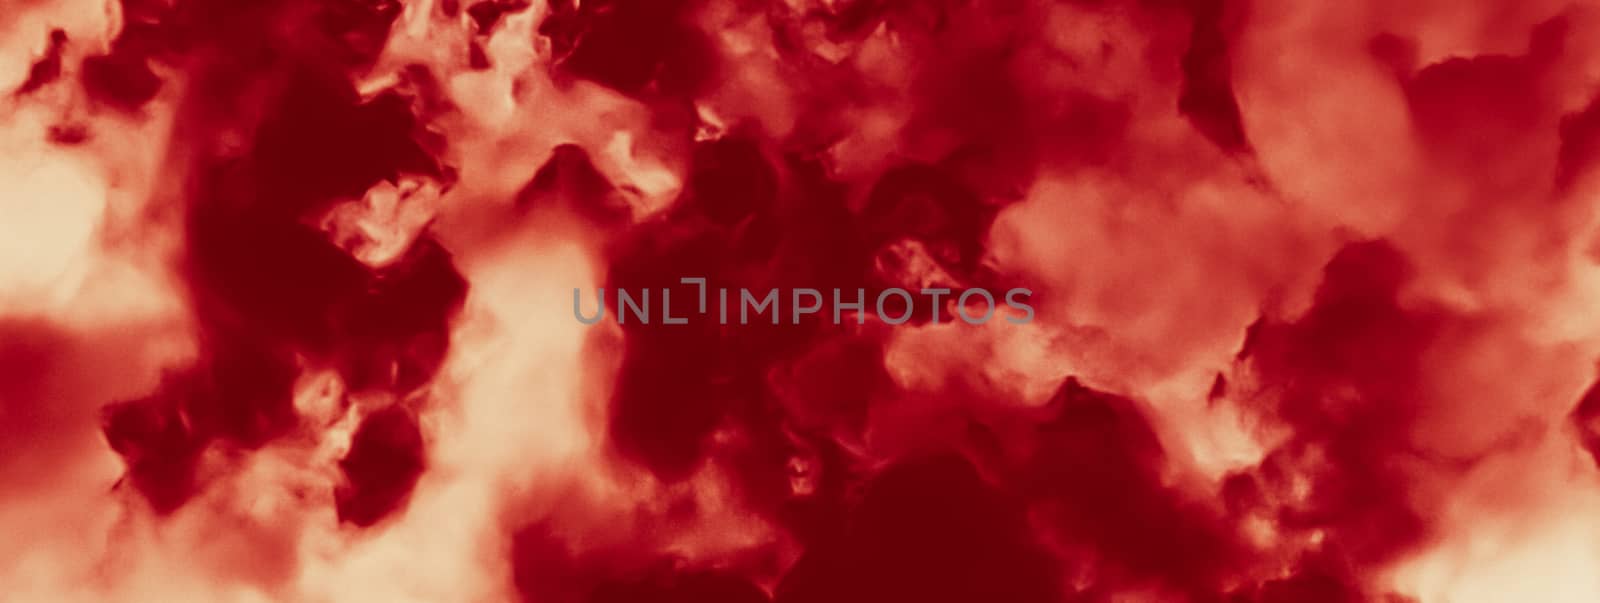 Hot fire flames or red clouds as minimalistic background design by Anneleven